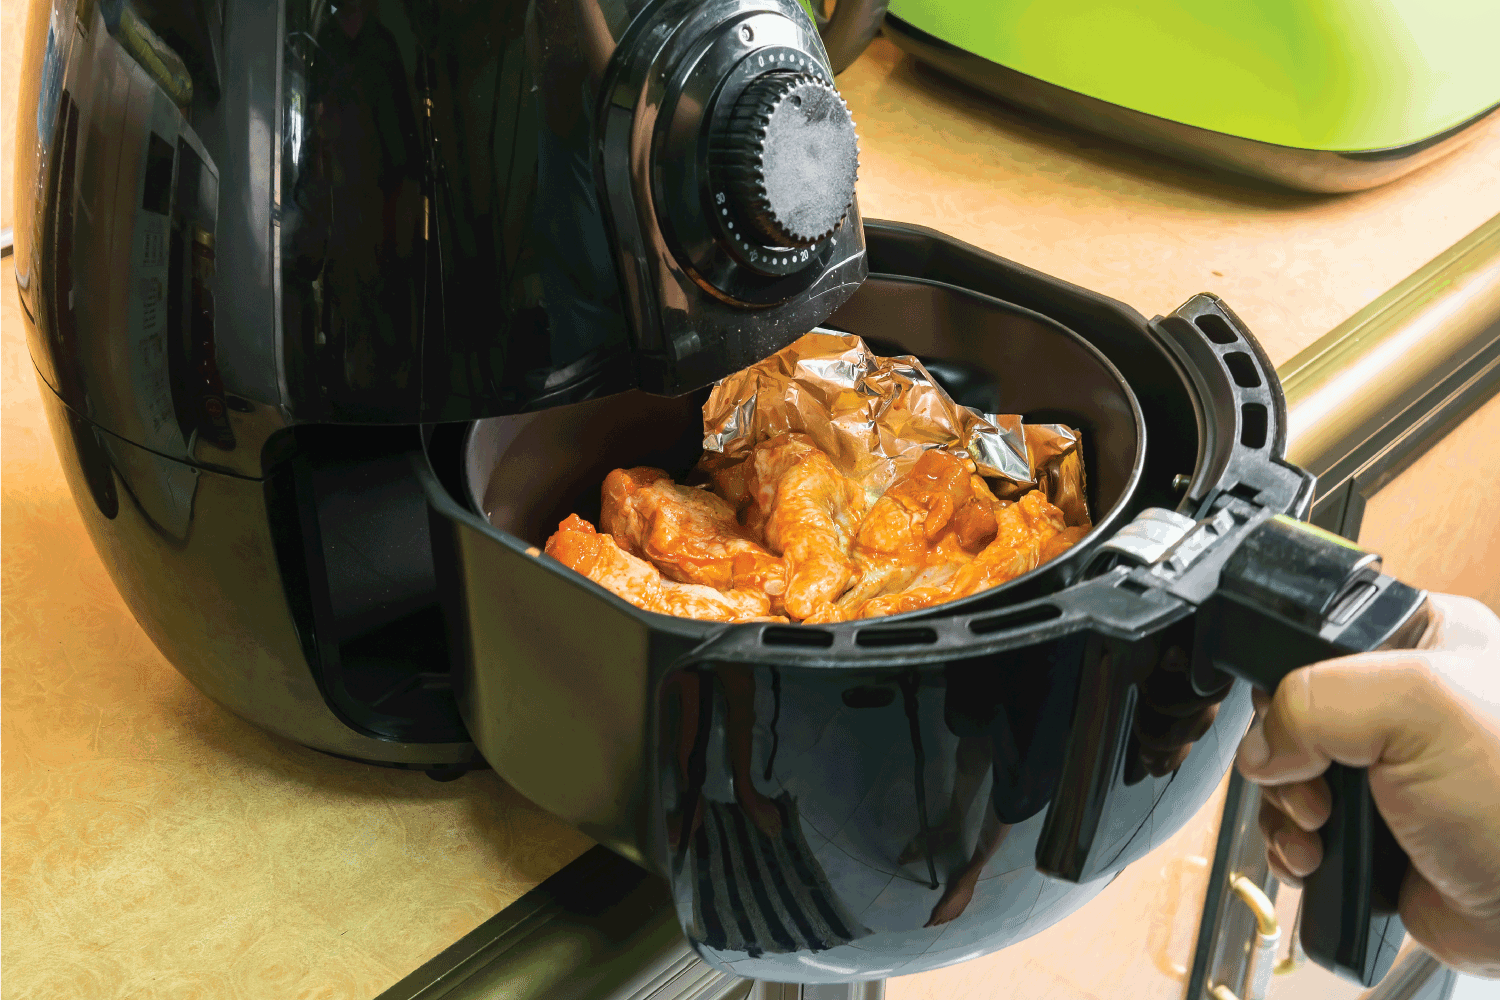 Chef's Grill BBQ Chicken Legs in oven air fryer. healthy cooking with oil